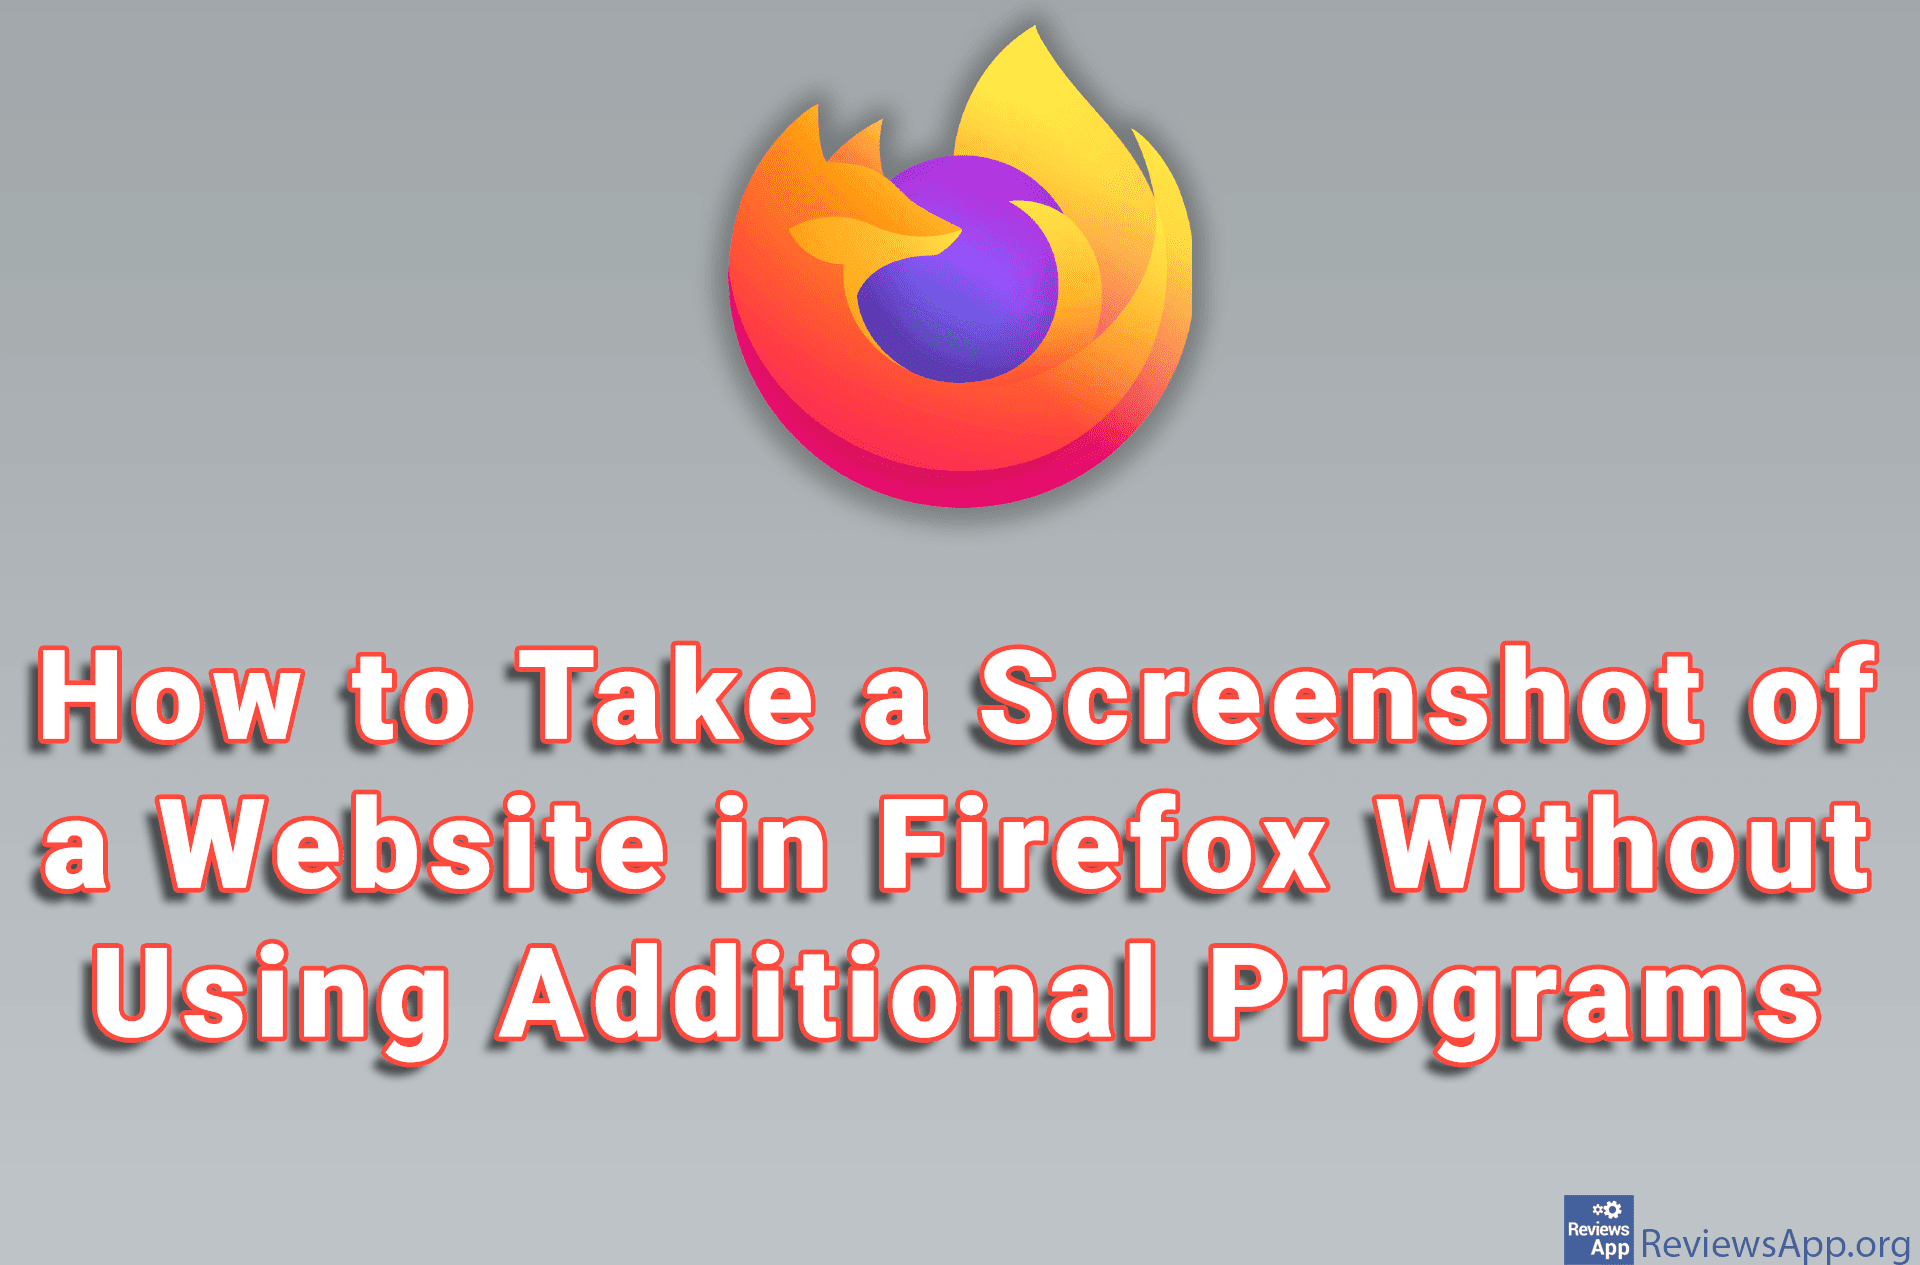 How to Take a Screenshot of a Website in Firefox Without Using Additional Programs